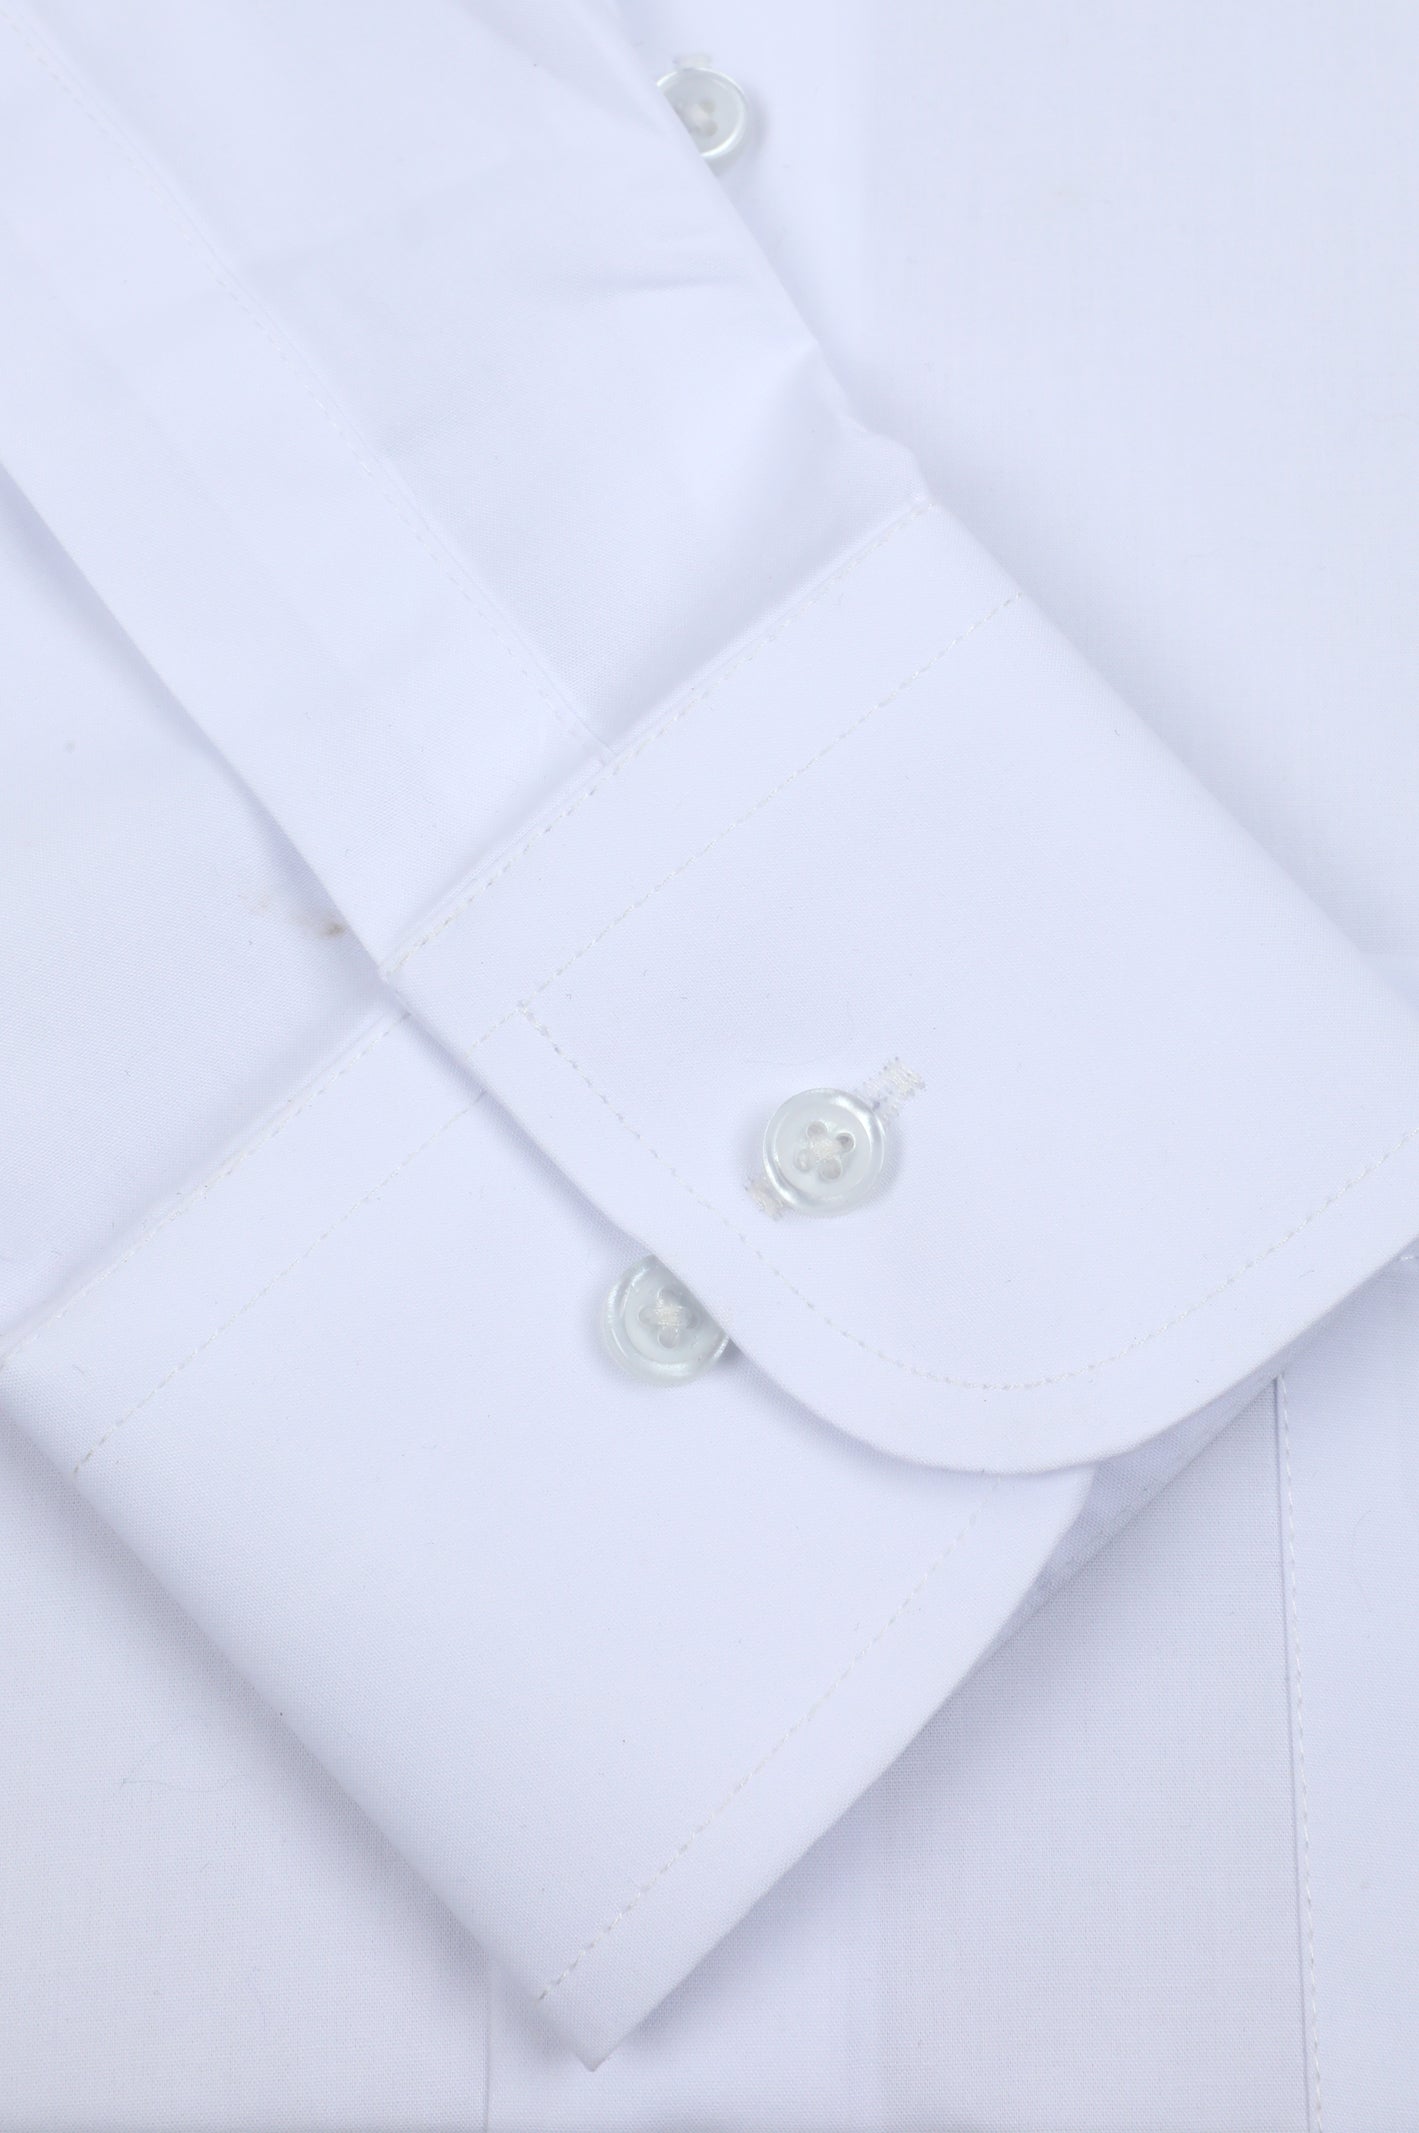 Formal Men Shirt in White SKU: AD25437-WHITE - Diners